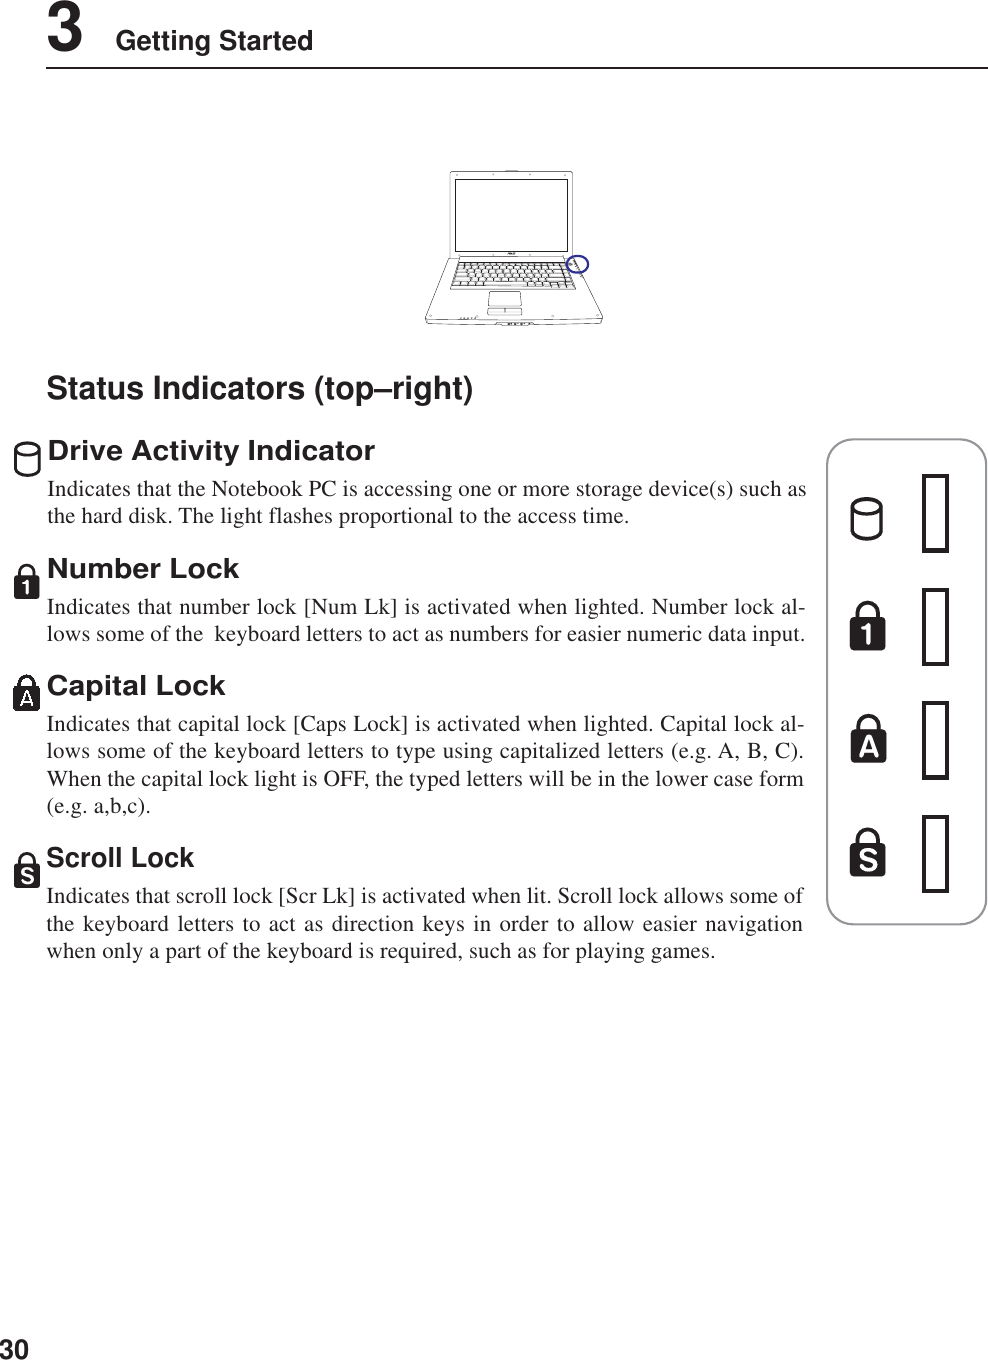 303    Getting StartedStatus Indicators (top–right)Drive Activity IndicatorIndicates that the Notebook PC is accessing one or more storage device(s) such asthe hard disk. The light flashes proportional to the access time.Number LockIndicates that number lock [Num Lk] is activated when lighted. Number lock al-lows some of the  keyboard letters to act as numbers for easier numeric data input.Capital LockIndicates that capital lock [Caps Lock] is activated when lighted. Capital lock al-lows some of the keyboard letters to type using capitalized letters (e.g. A, B, C).When the capital lock light is OFF, the typed letters will be in the lower case form(e.g. a,b,c).Scroll LockIndicates that scroll lock [Scr Lk] is activated when lit. Scroll lock allows some ofthe keyboard letters to act as direction keys in order to allow easier navigationwhen only a part of the keyboard is required, such as for playing games.